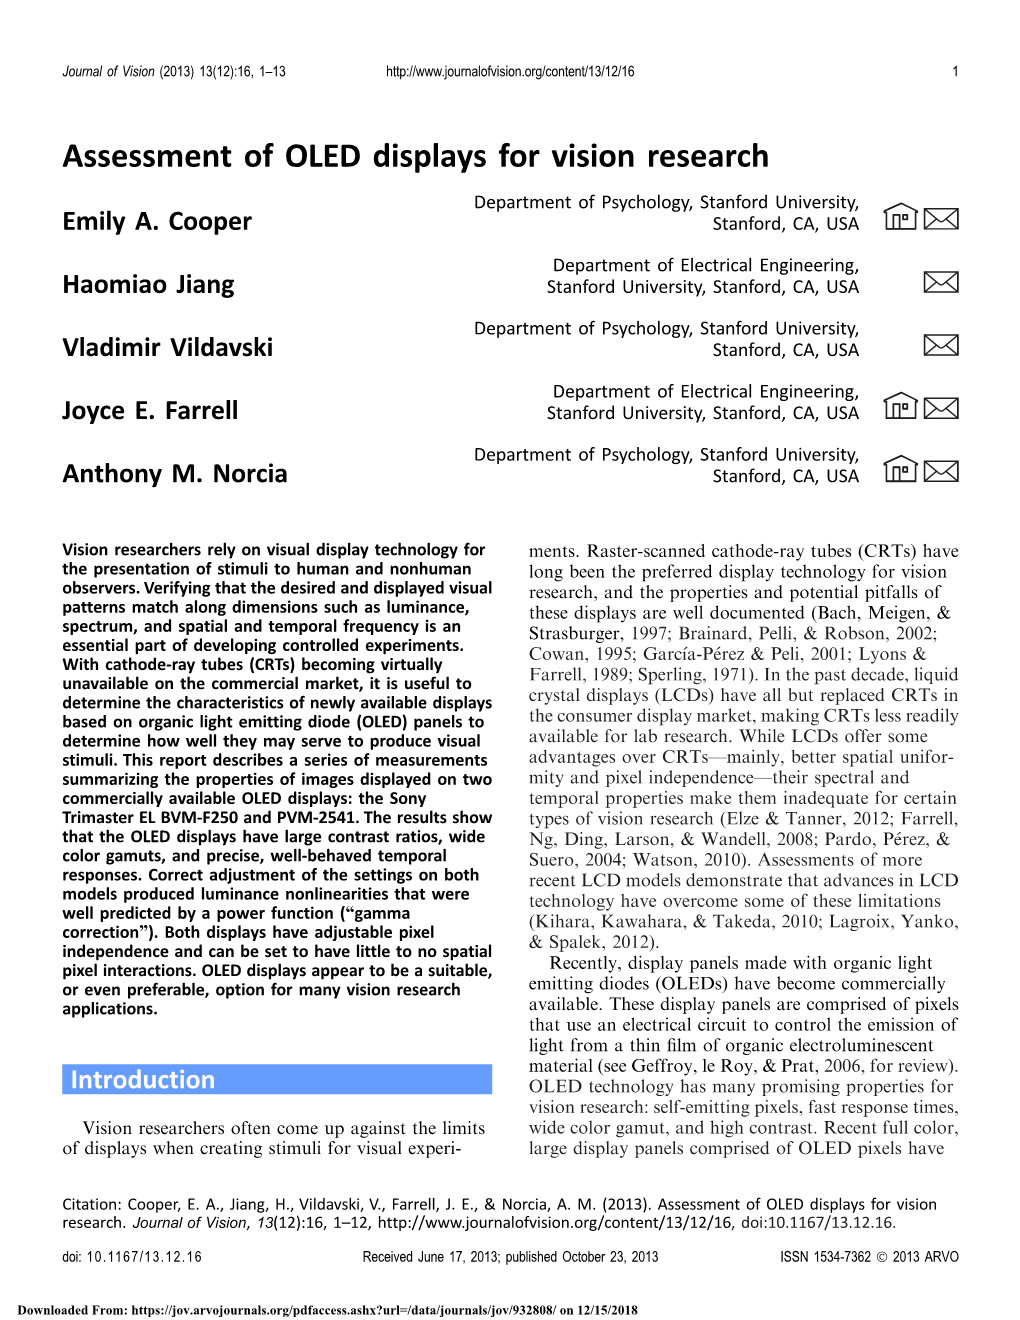 Assessment of OLED Displays for Vision Research Department of Psychology, Stanford University, # Emily A